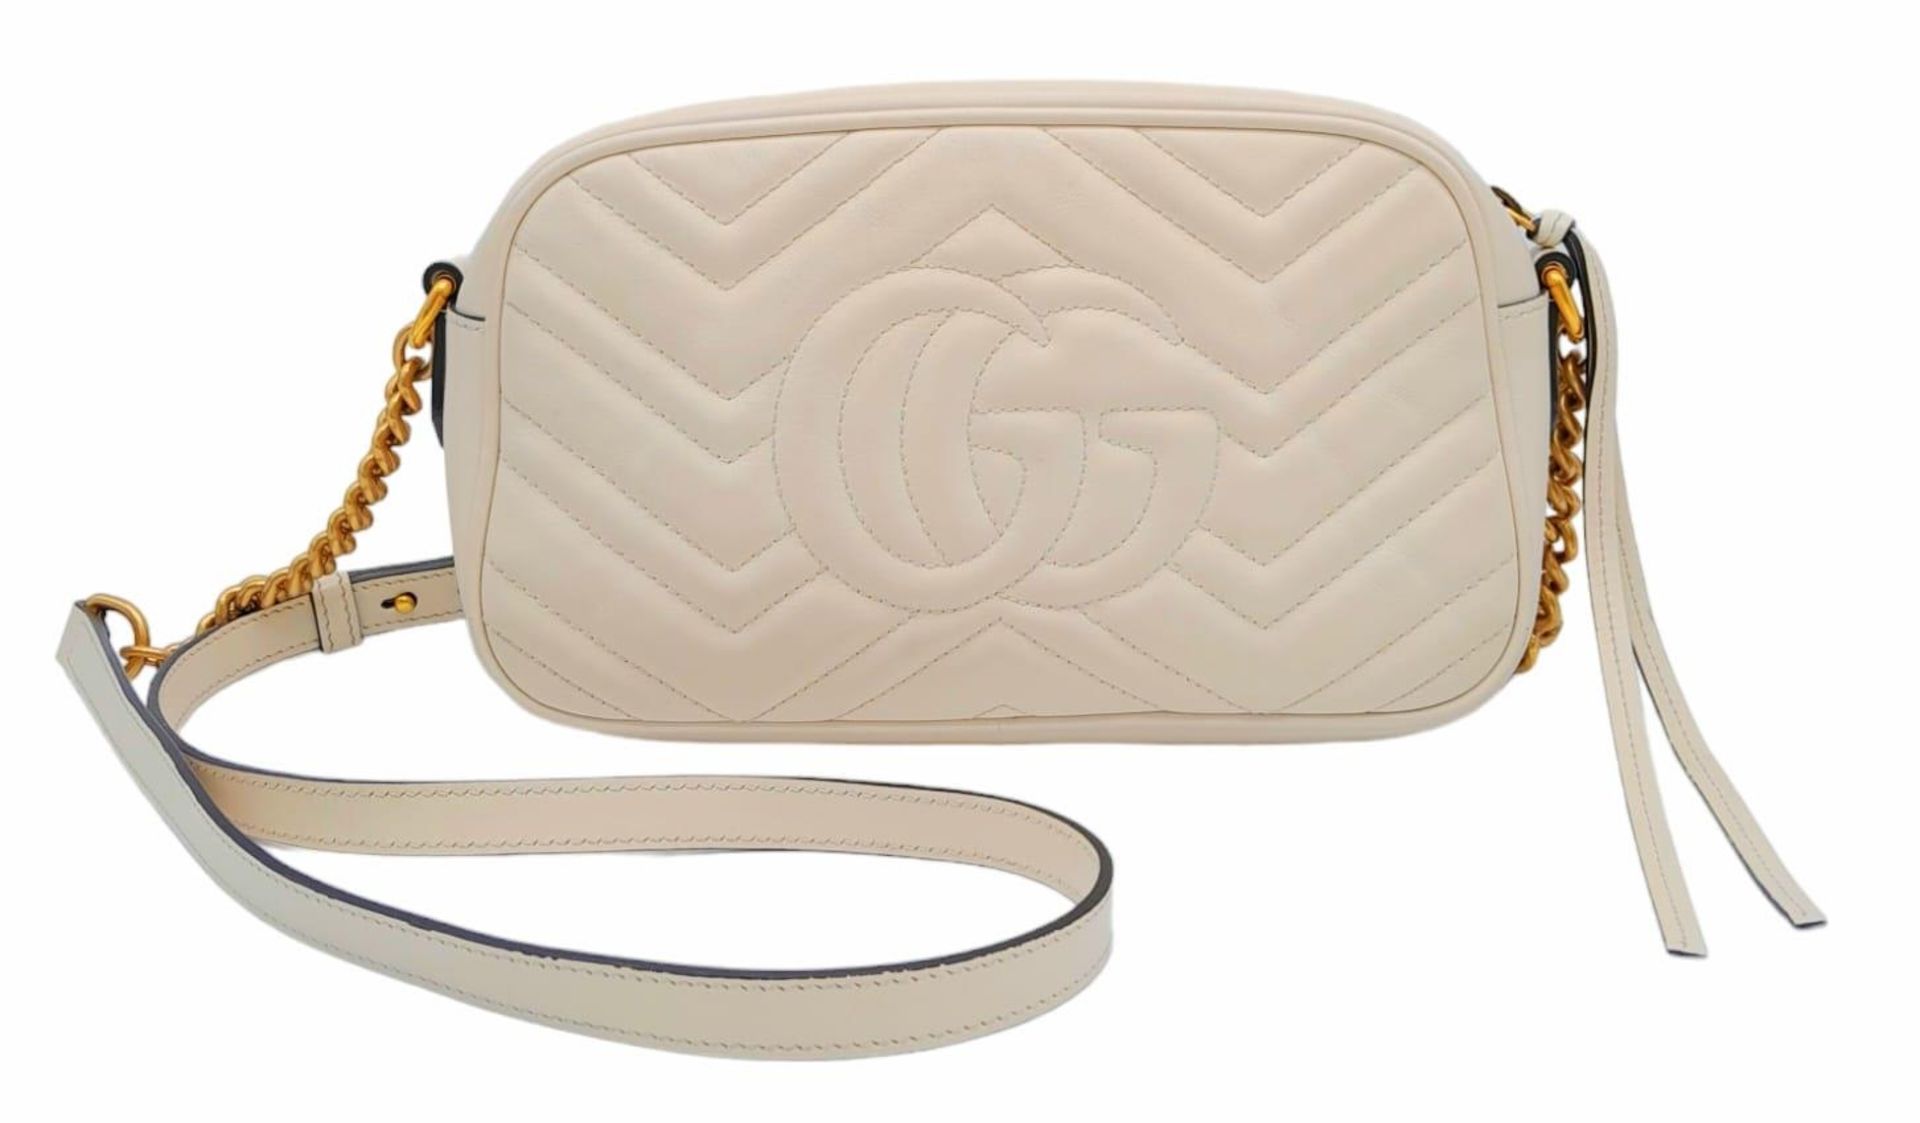 A Gucci Ivory GG Marmont Cross Body Bag. Quilted leather exterior with gold-toned hardware, chain